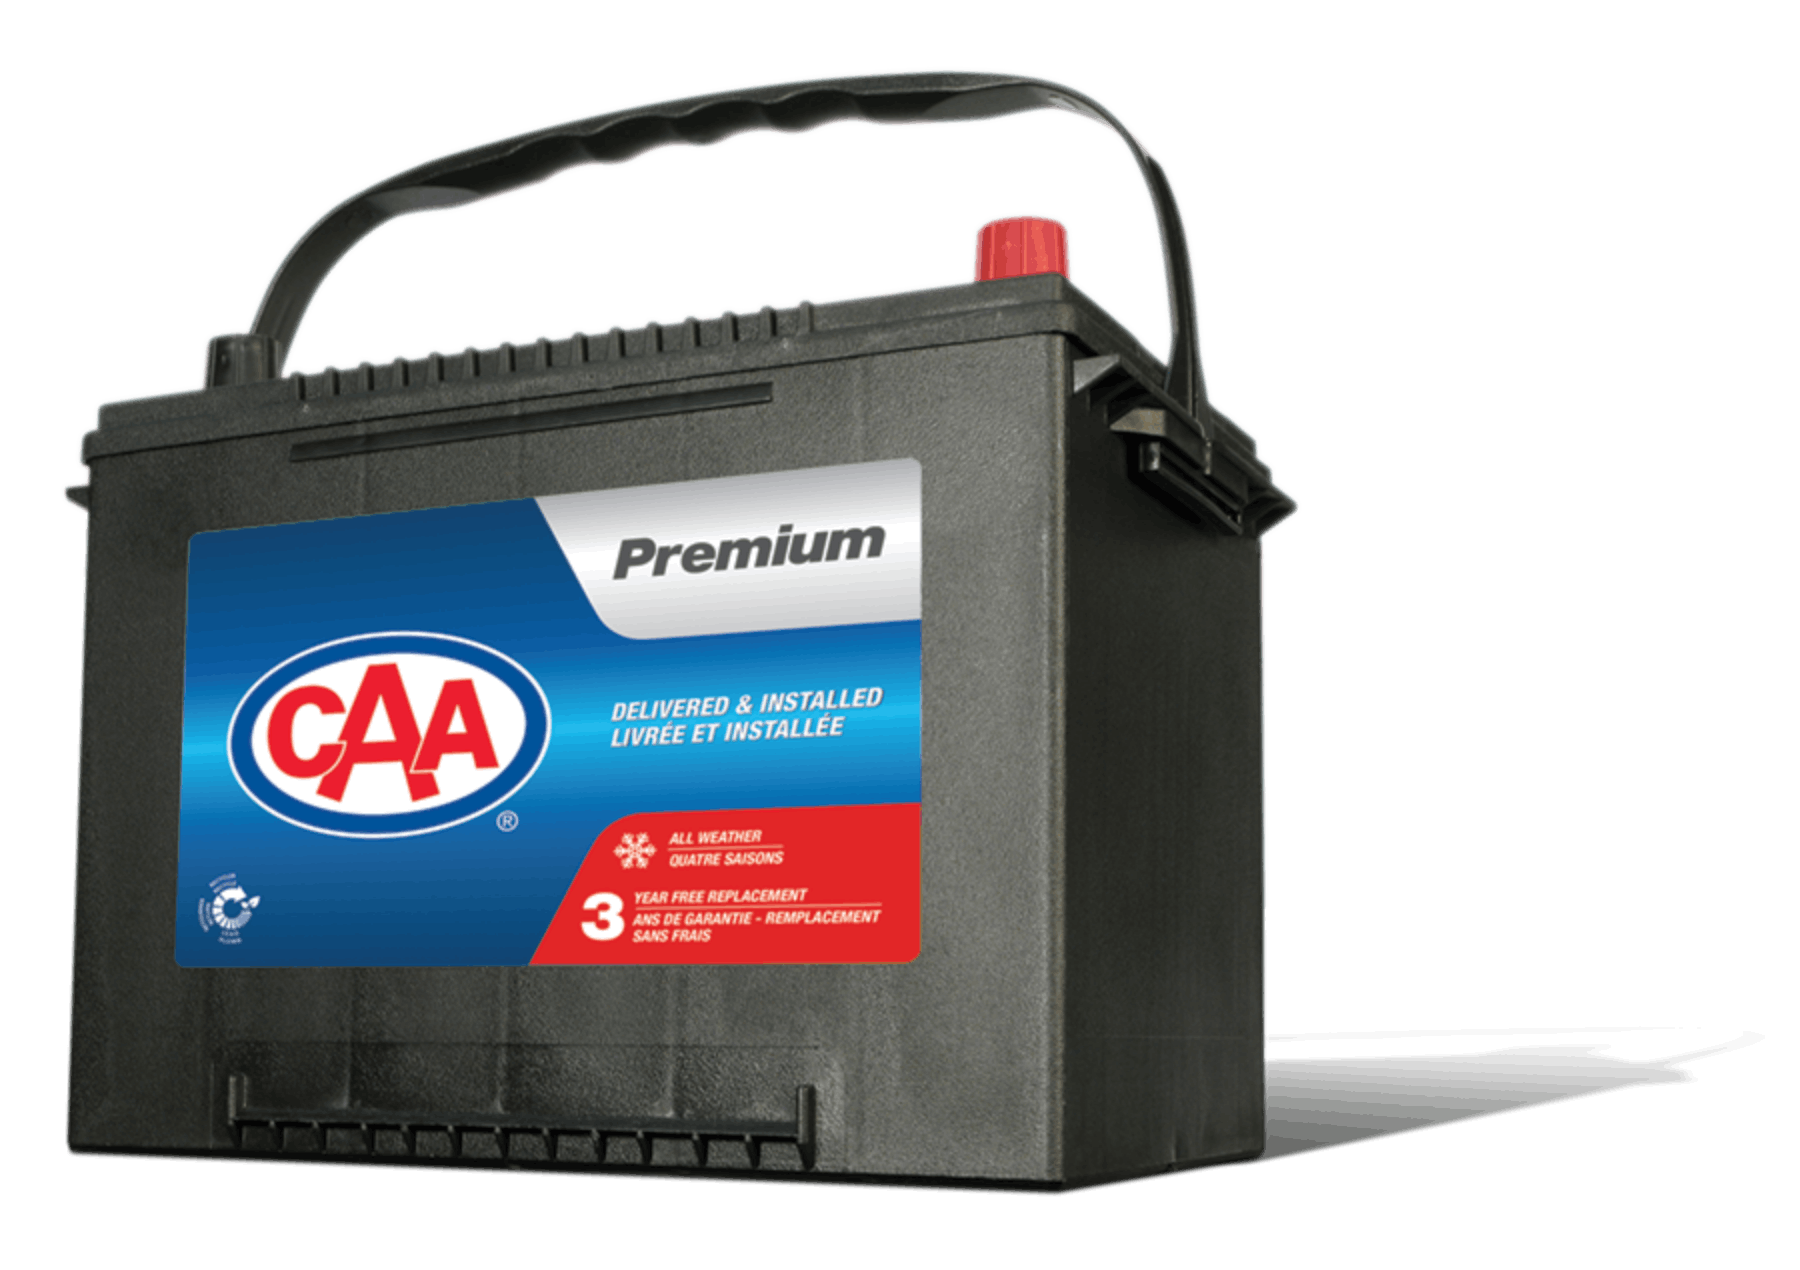 Image of a CAA Premium Battery